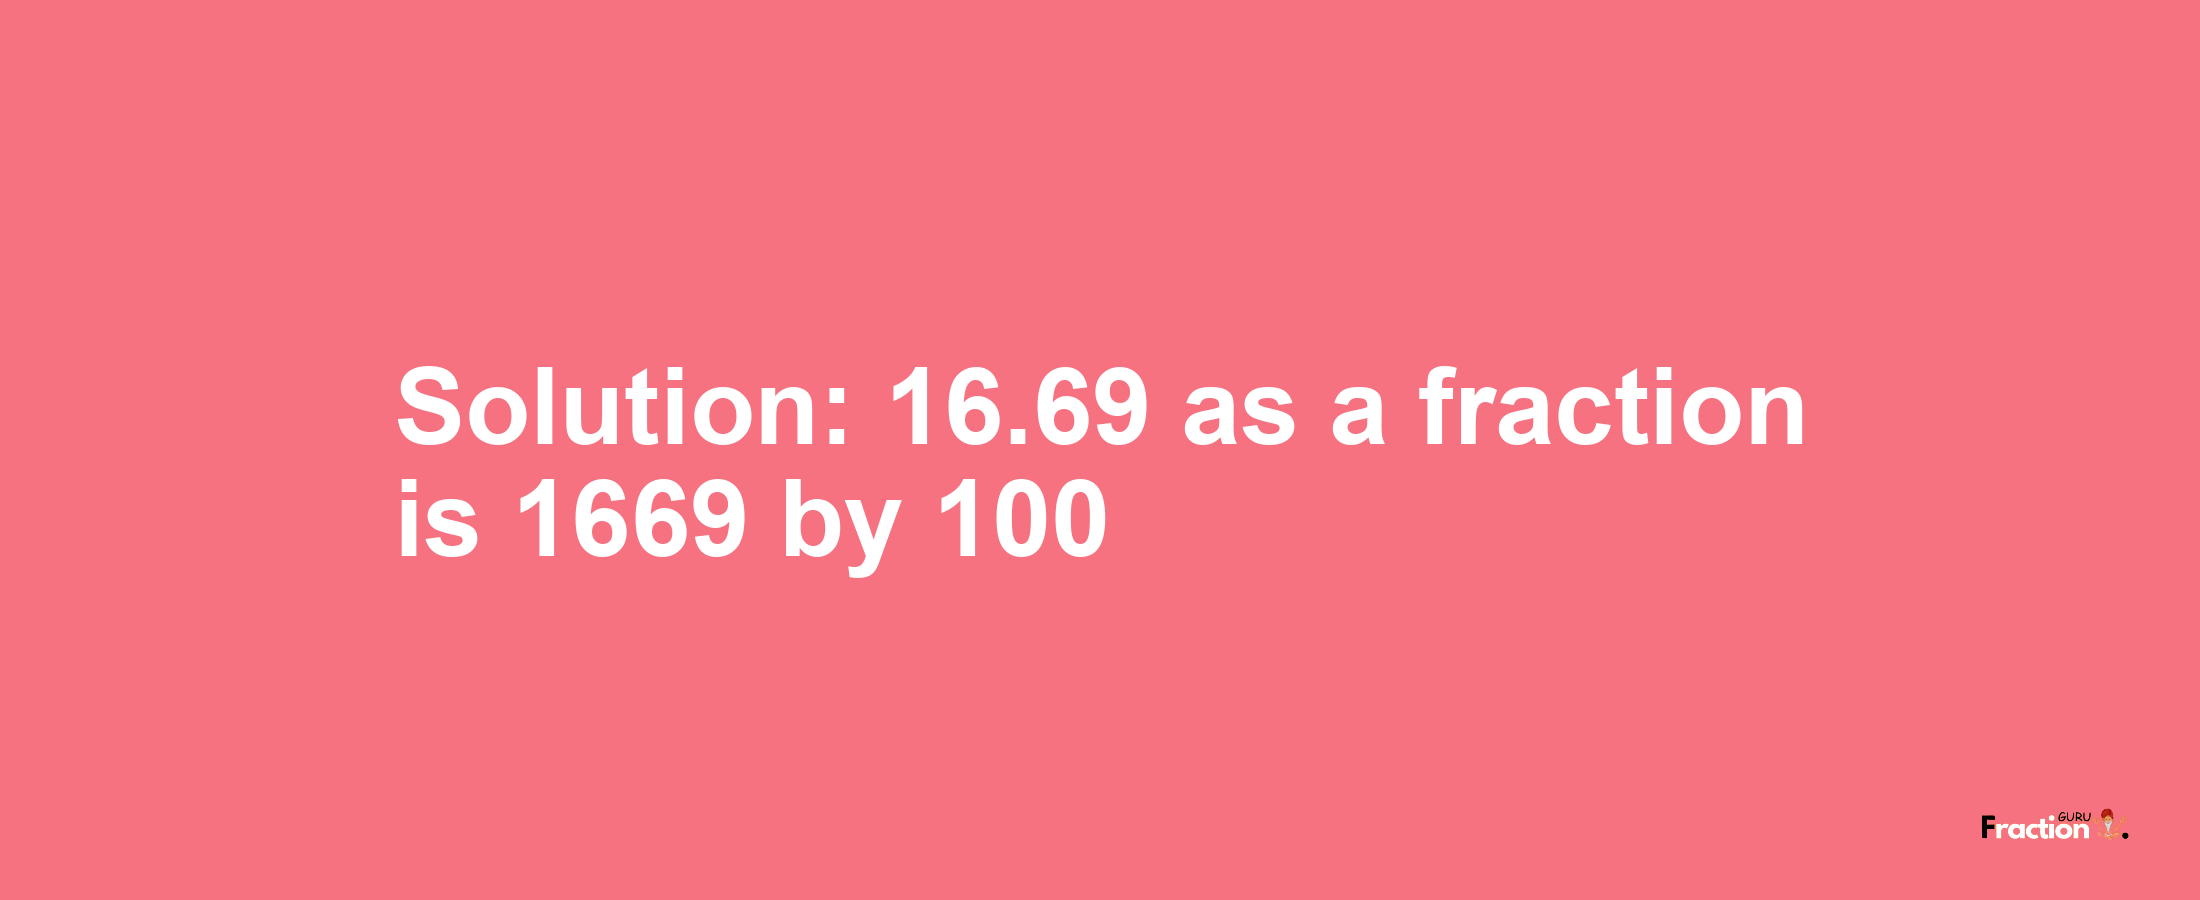 Solution:16.69 as a fraction is 1669/100